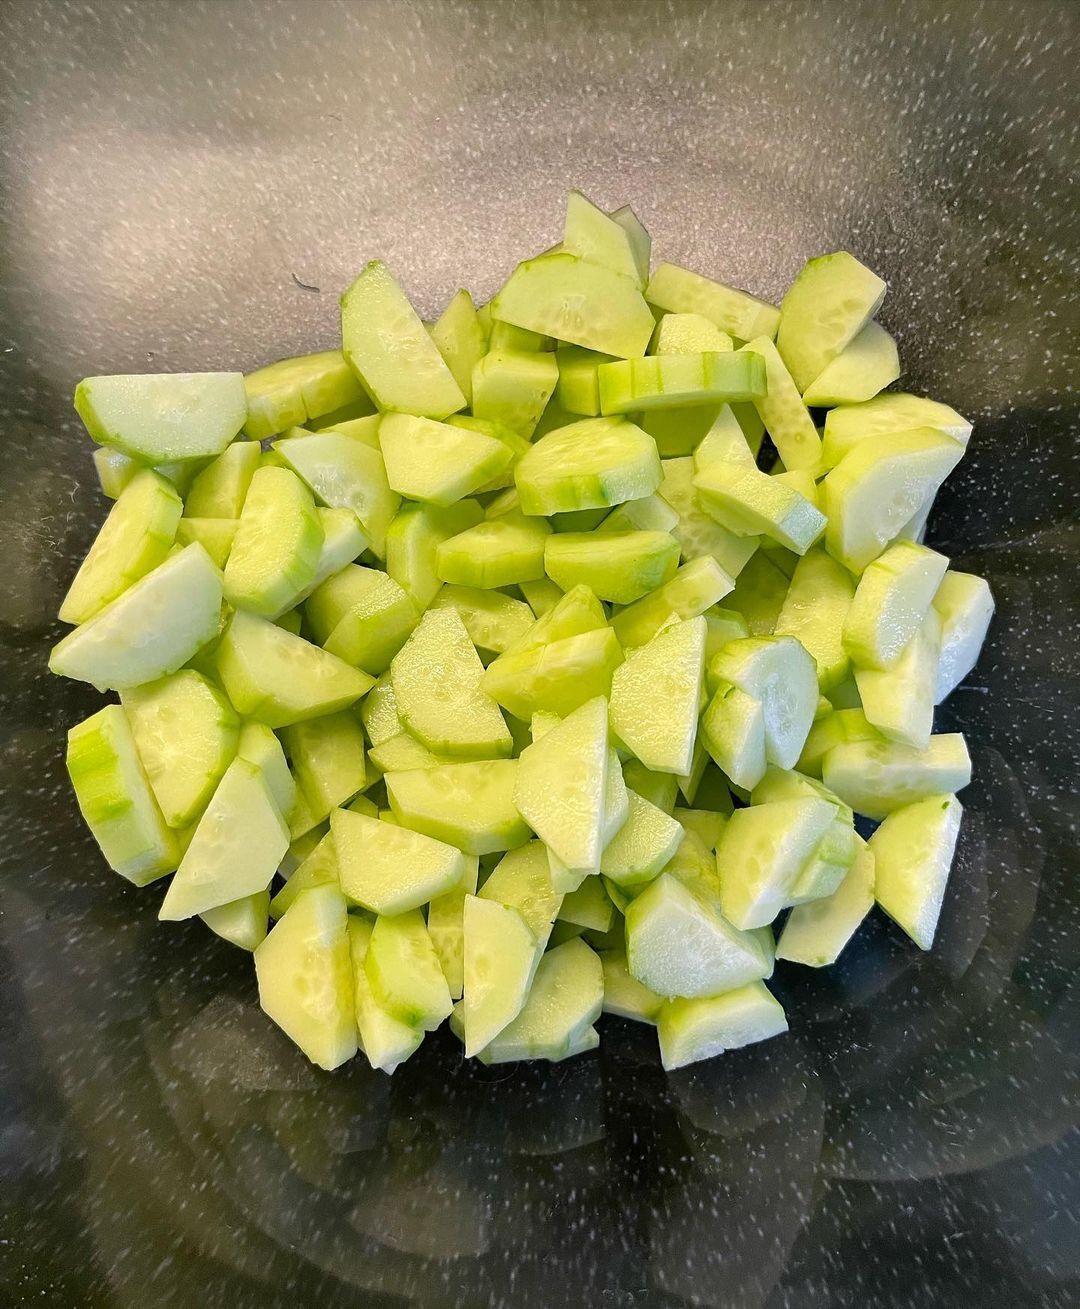 Cucumbers for making the salad